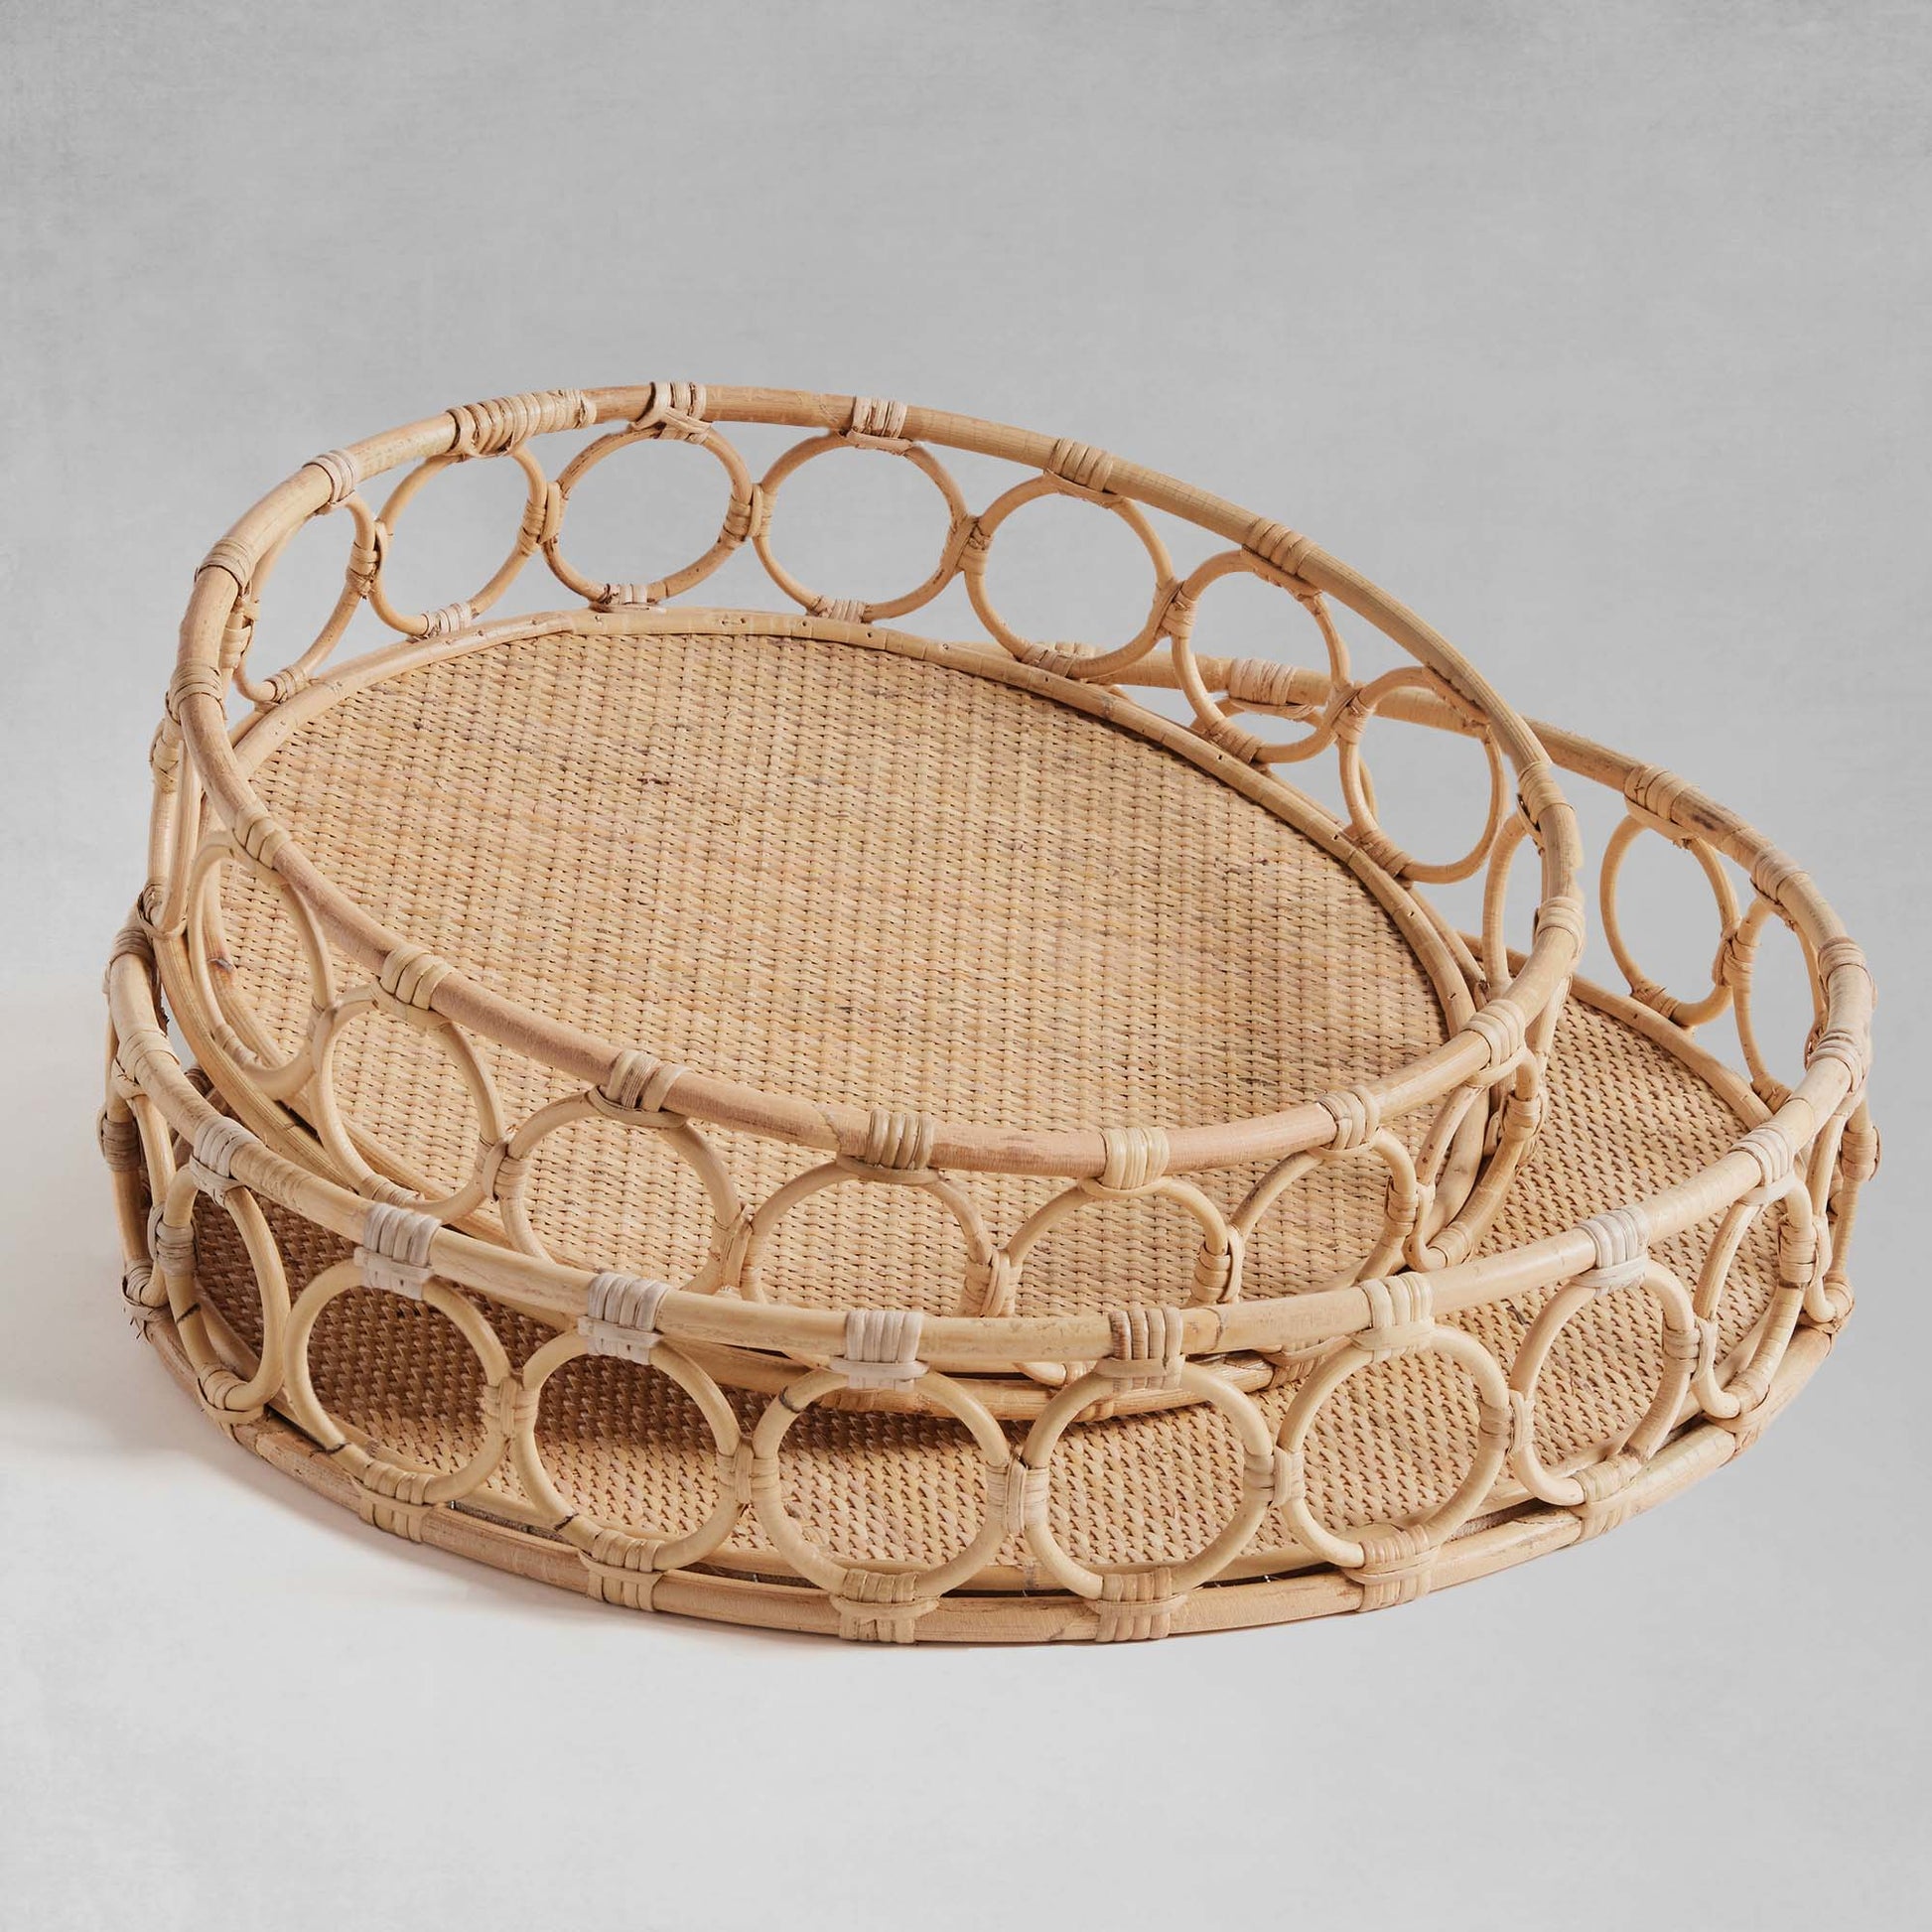 Lattice round rattan serving trays stacked with gray background.